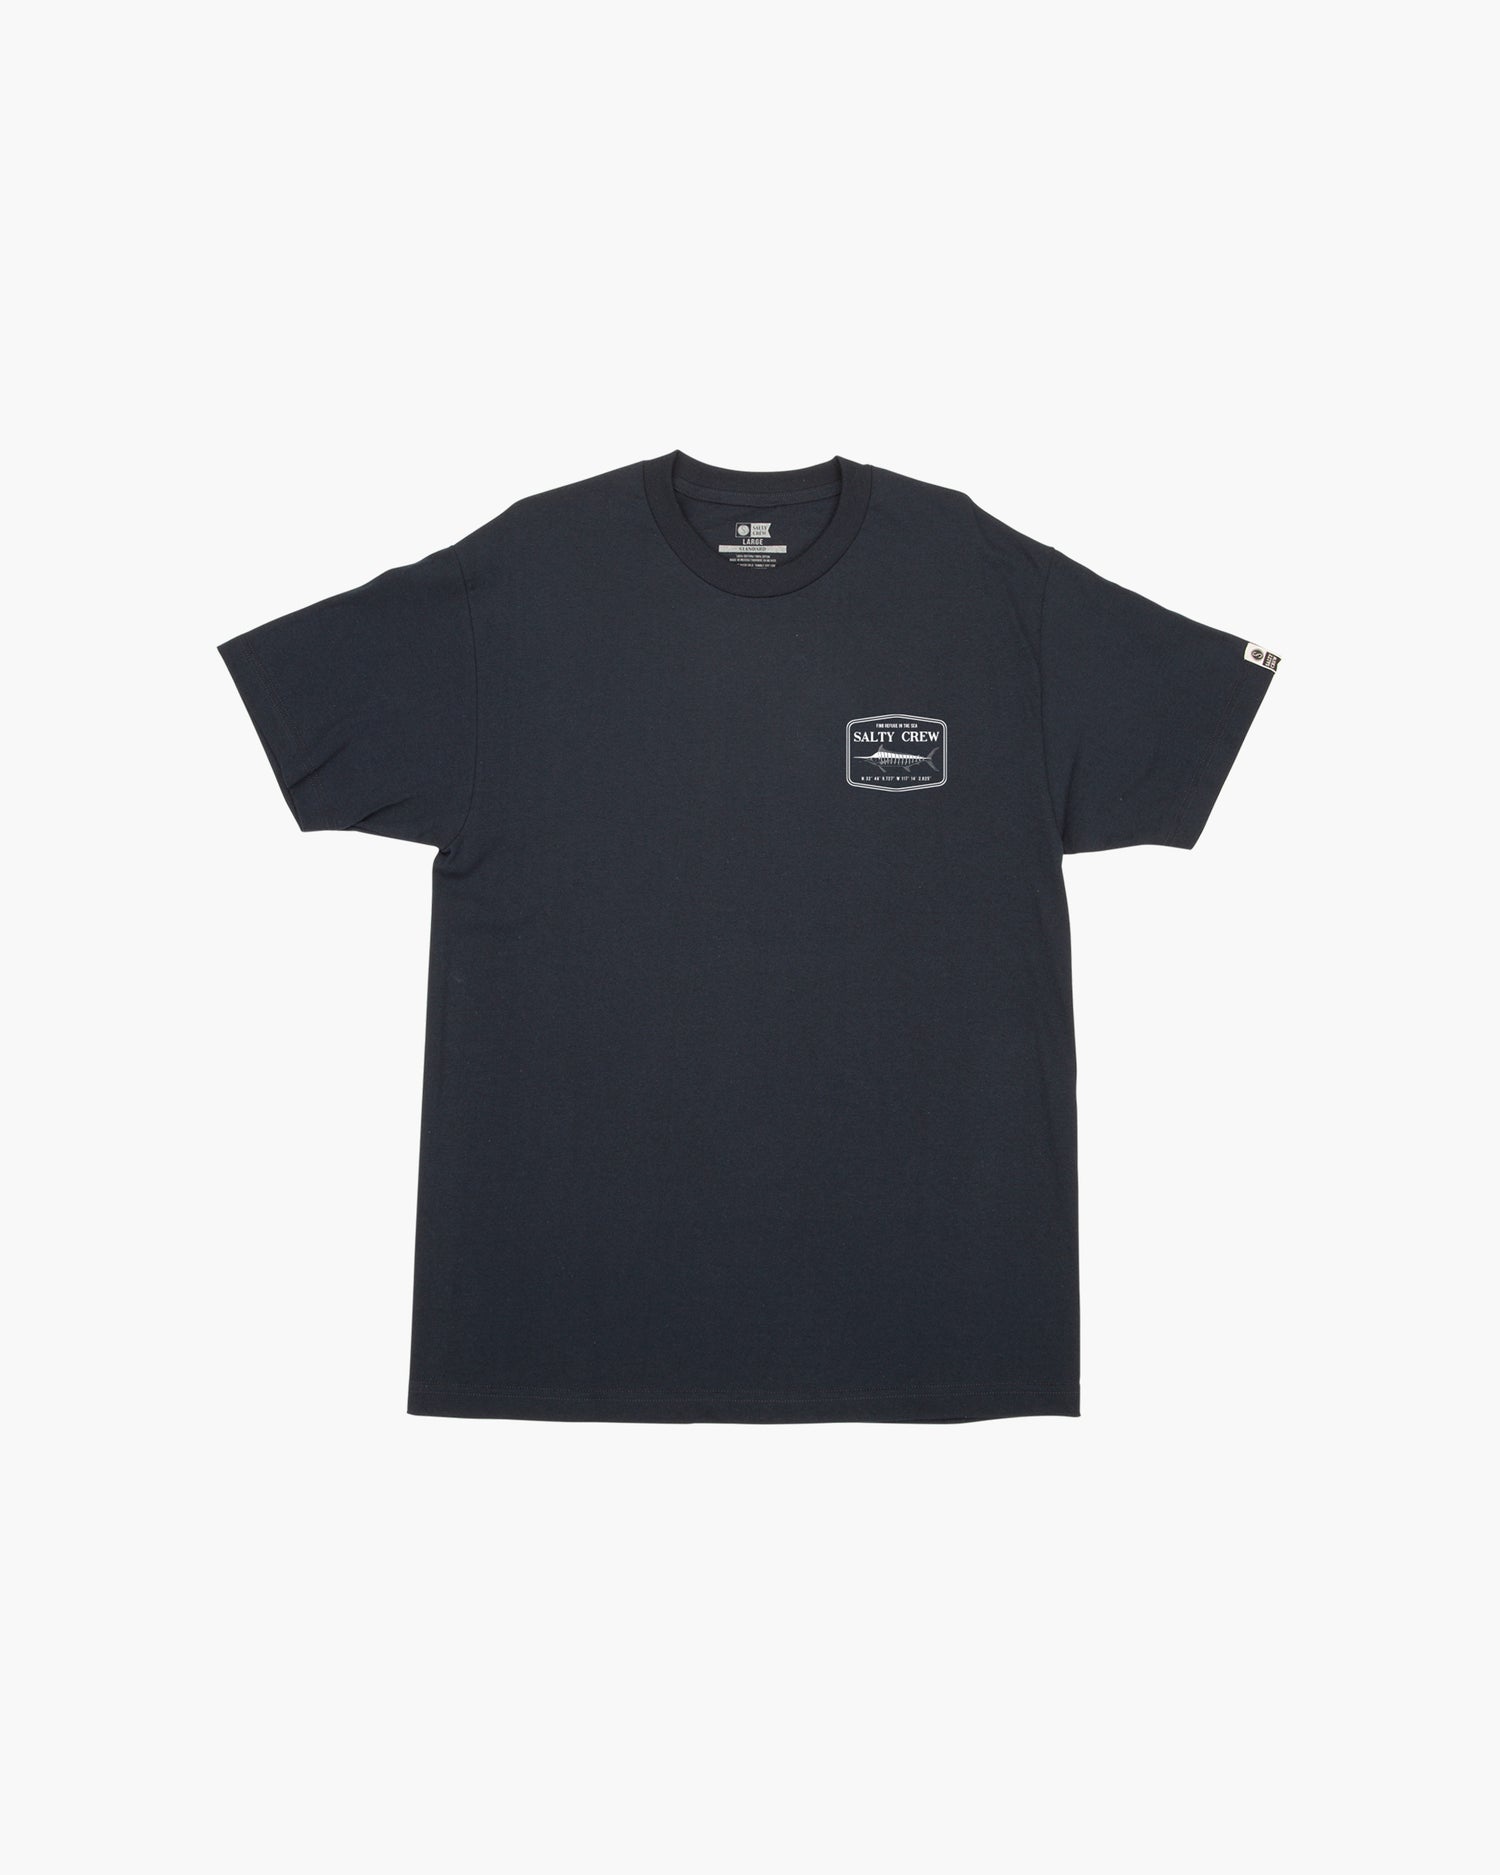 Off body front of Stealth Navy Standard S/S Tee